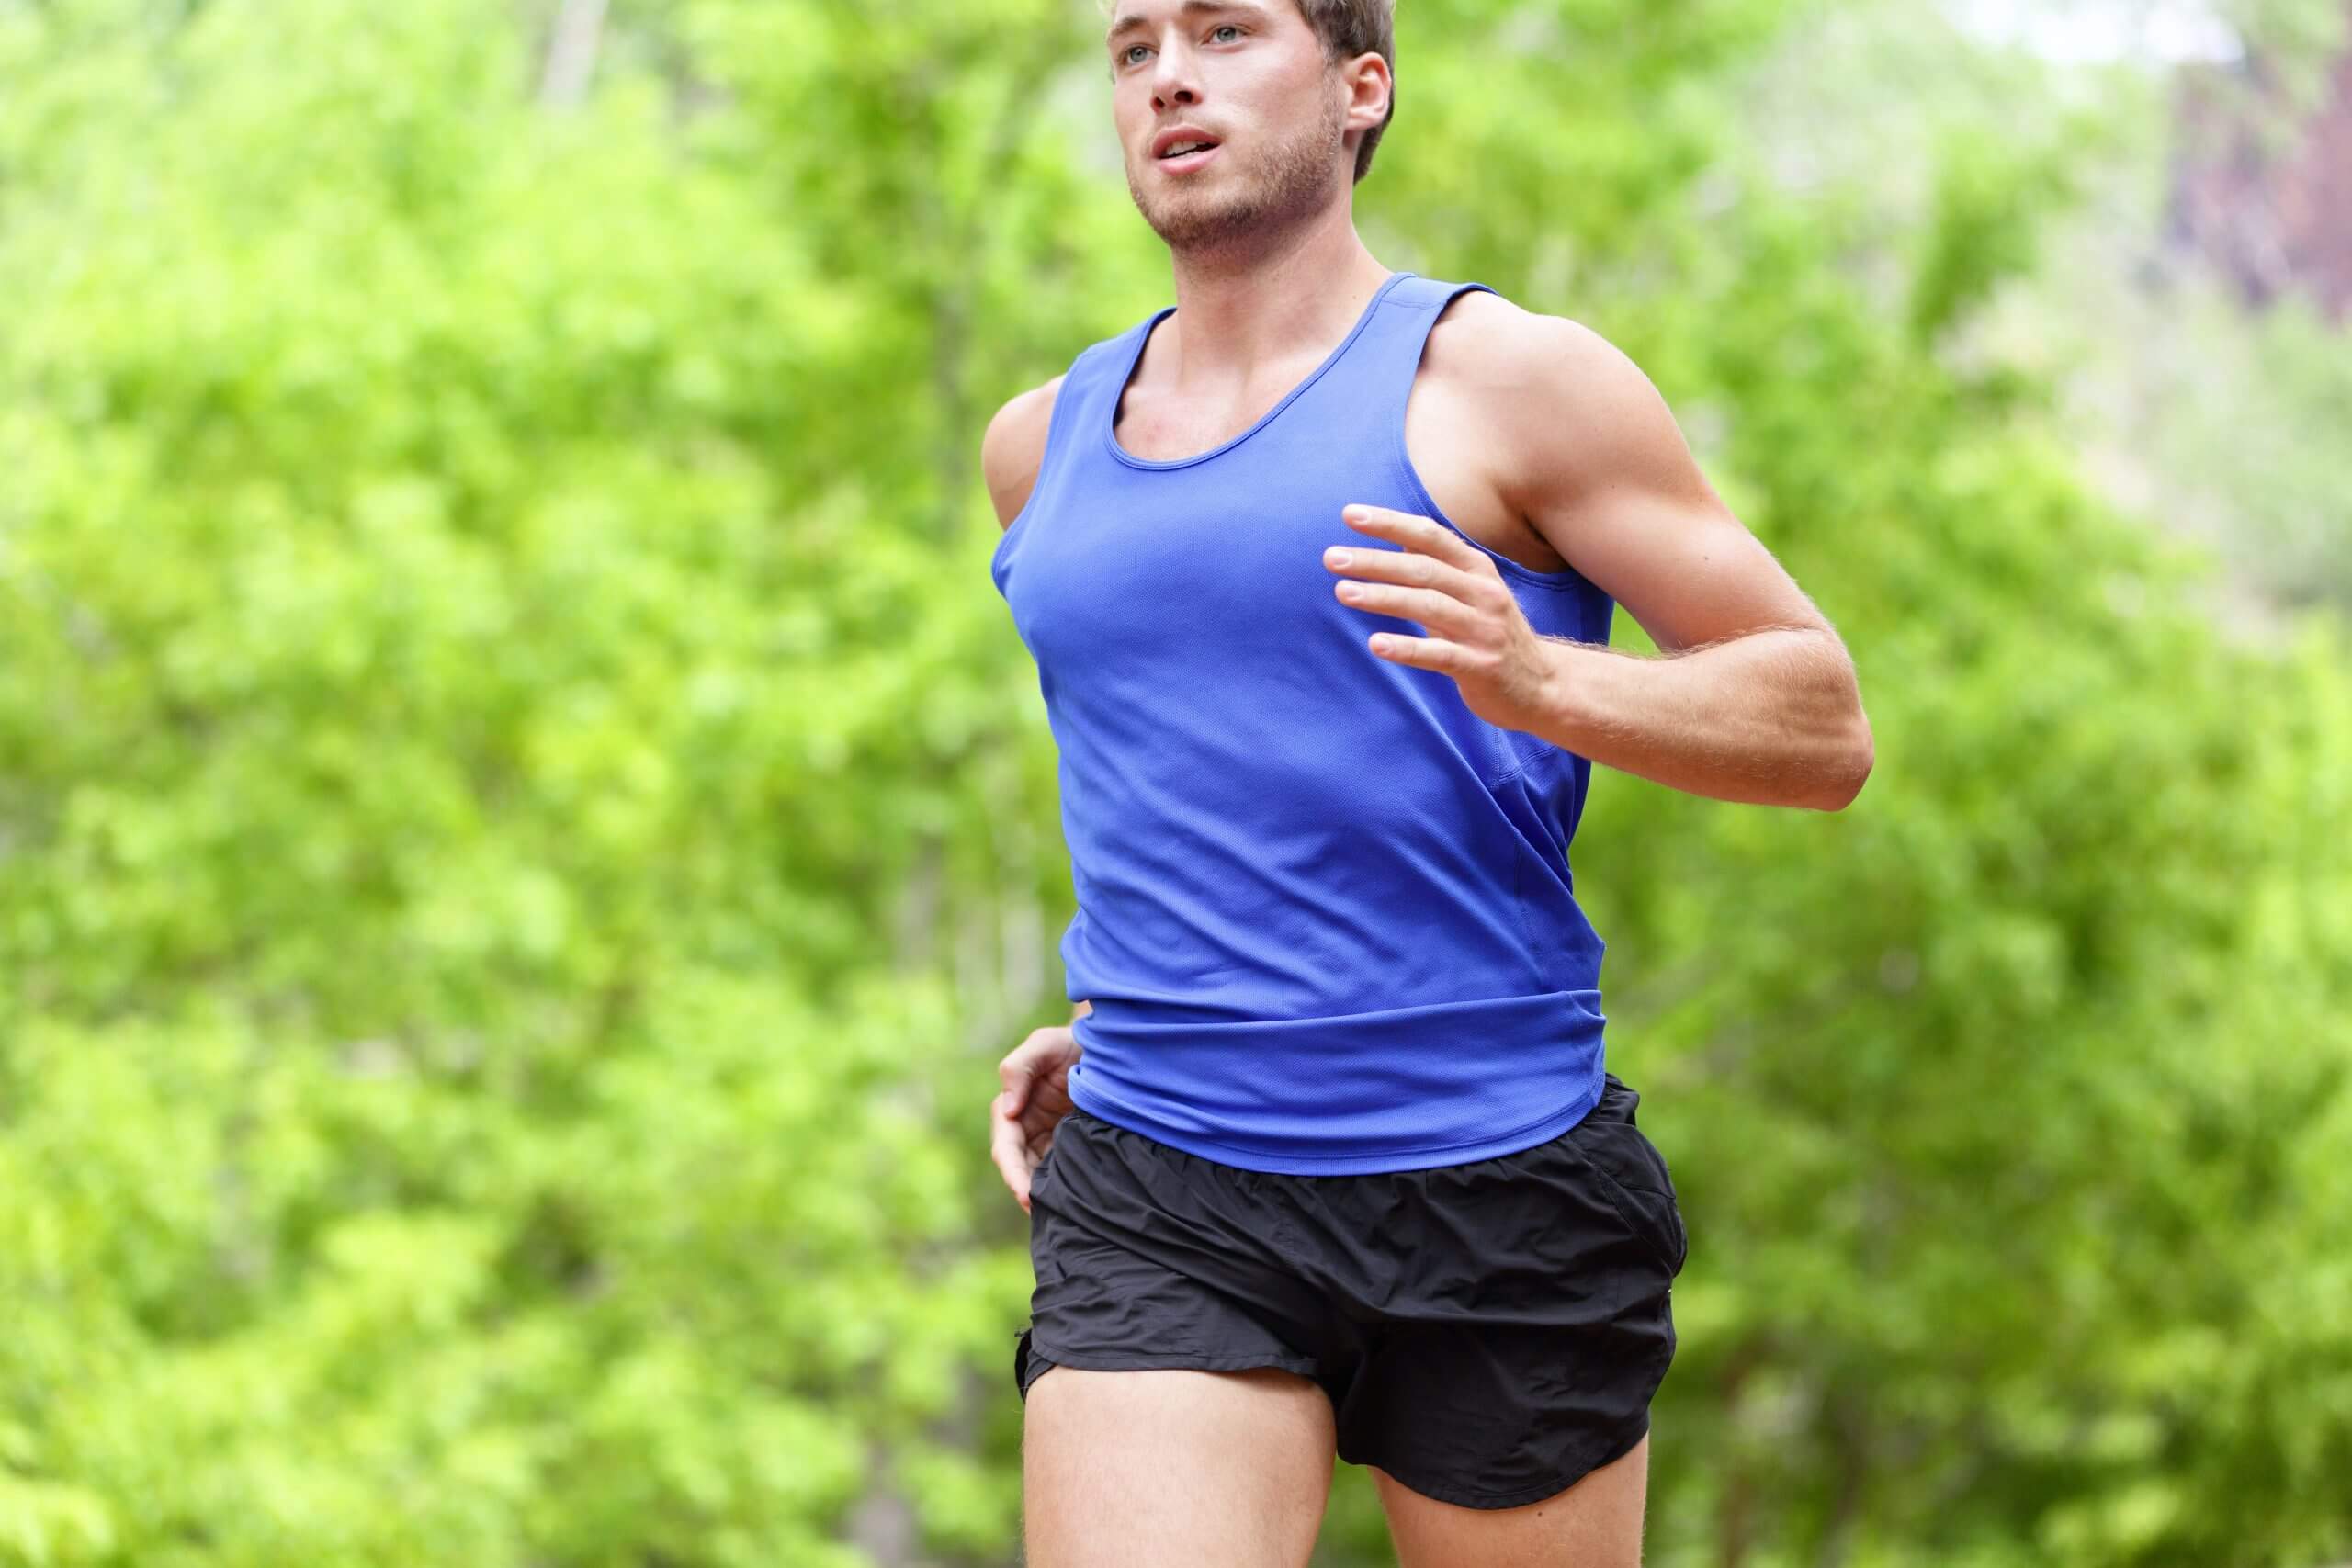 Man running on road. Sport and fitness runner training for marathon run doing high intensity interval training sprint workout outdoors in summer. Male athlete sports model fit and healthy aspirations.